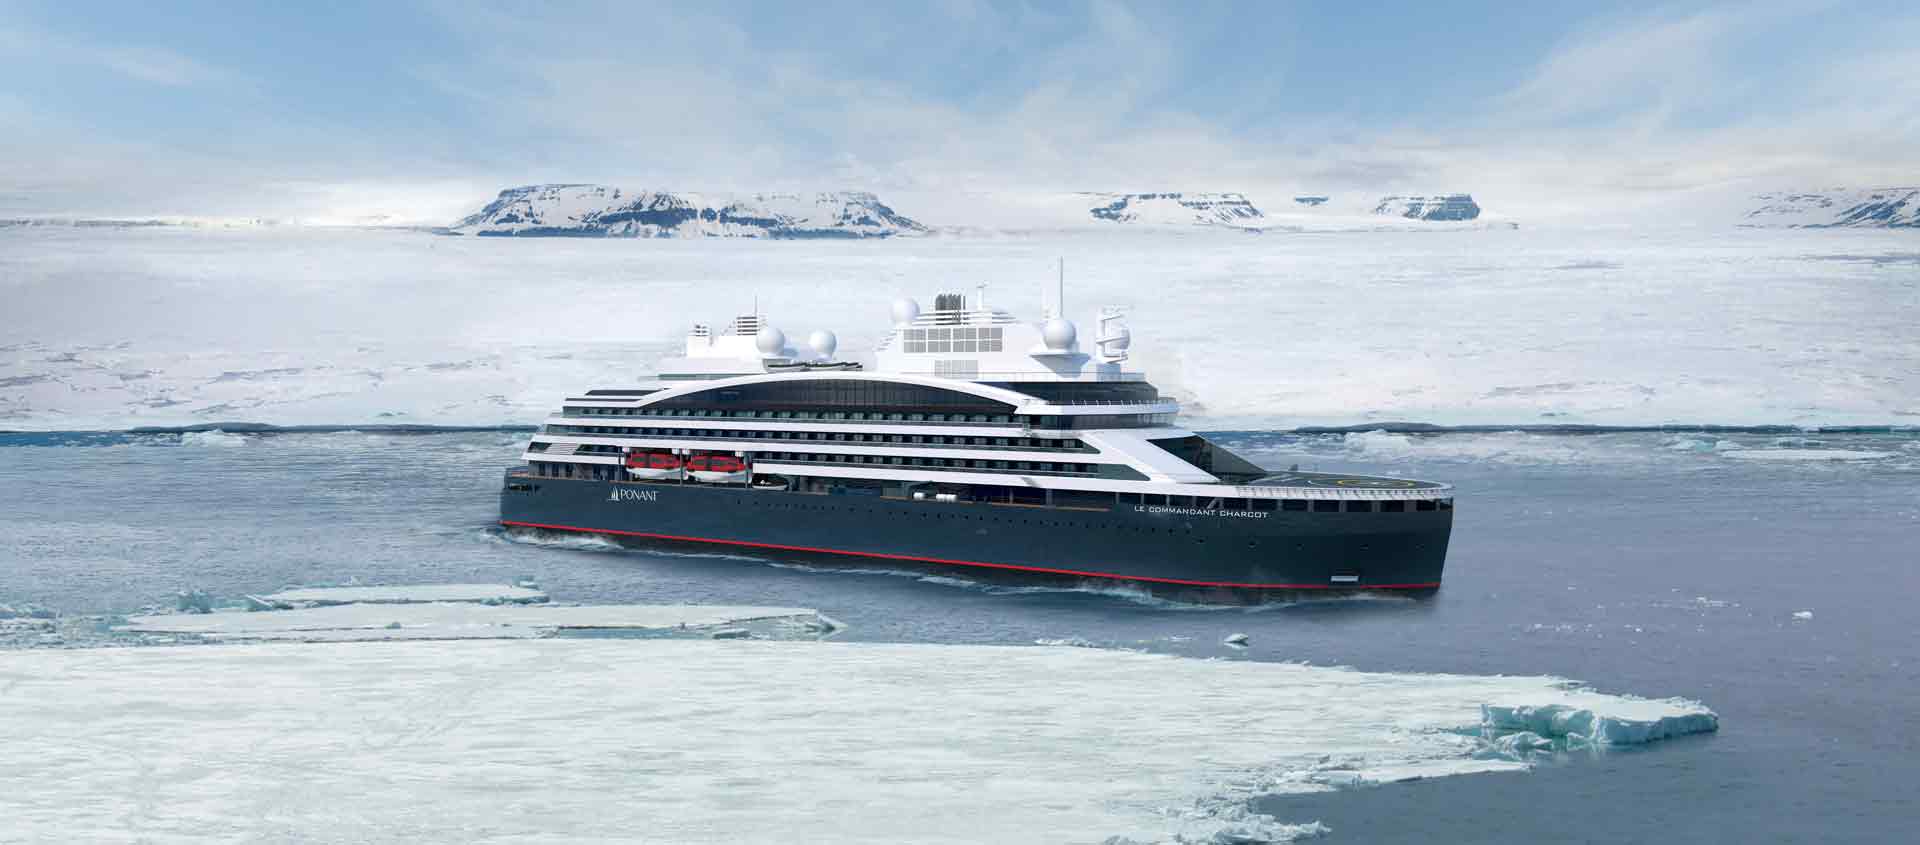 Cruise South of the Antarctic Circle image of icebreaker Le Commandant Charcot